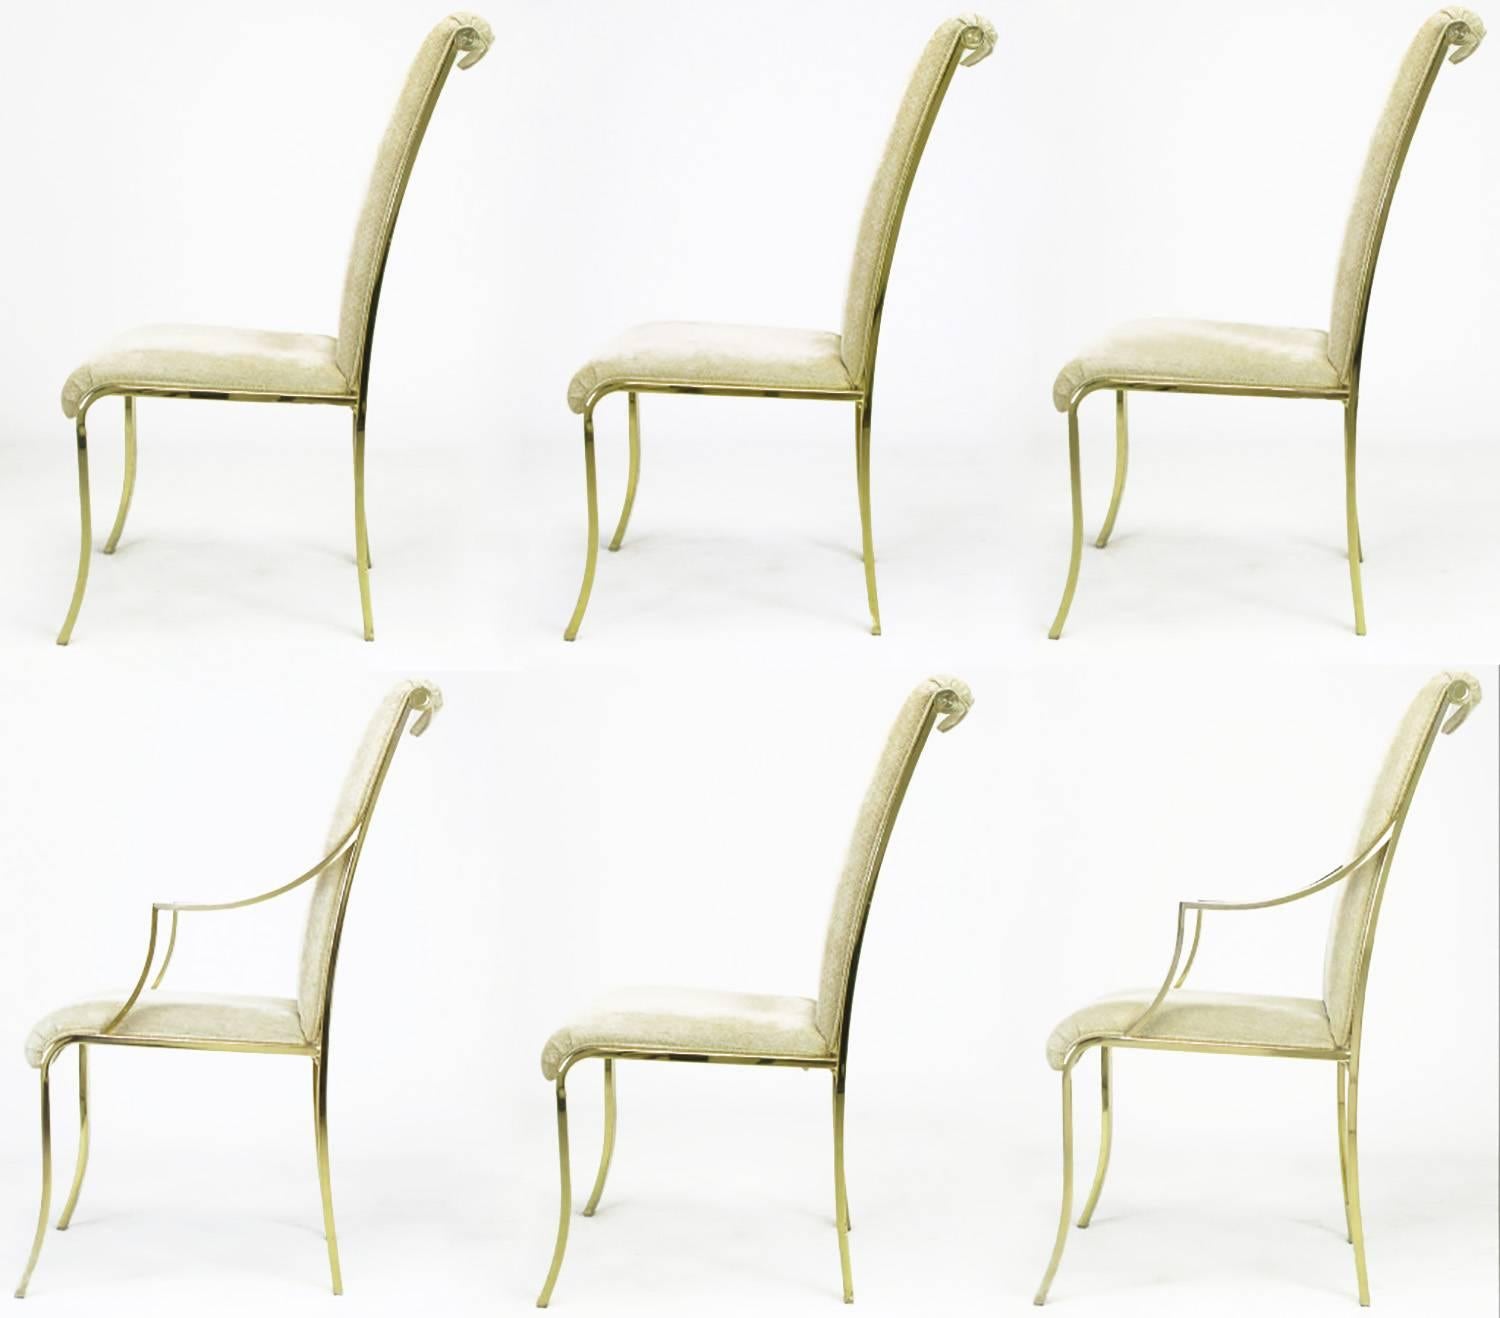 Set of six Design Institute of America brass and chenille upholstered dining chairs with Art Deco details. Four side chairs and two armchairs with a thin but sturdy brass flat bar frame. Curves in the right places with sloped front edge to the